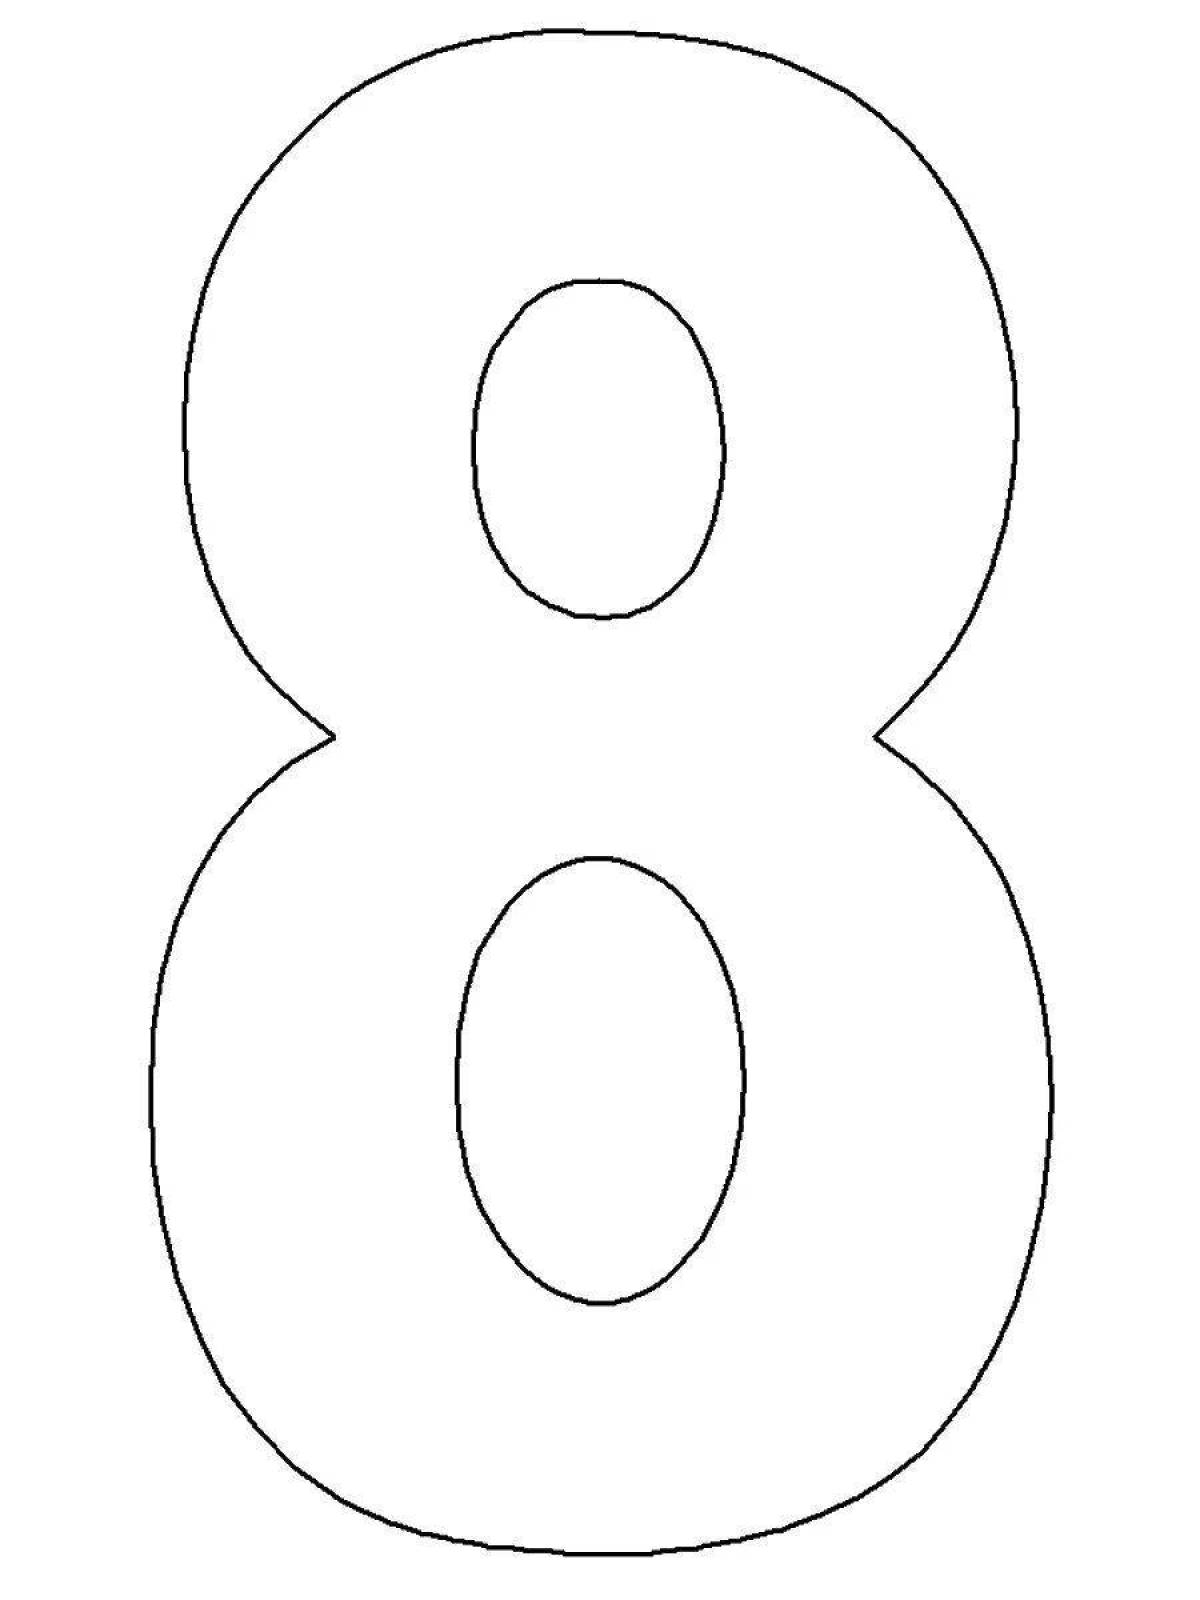 Awesome coloring page number 80